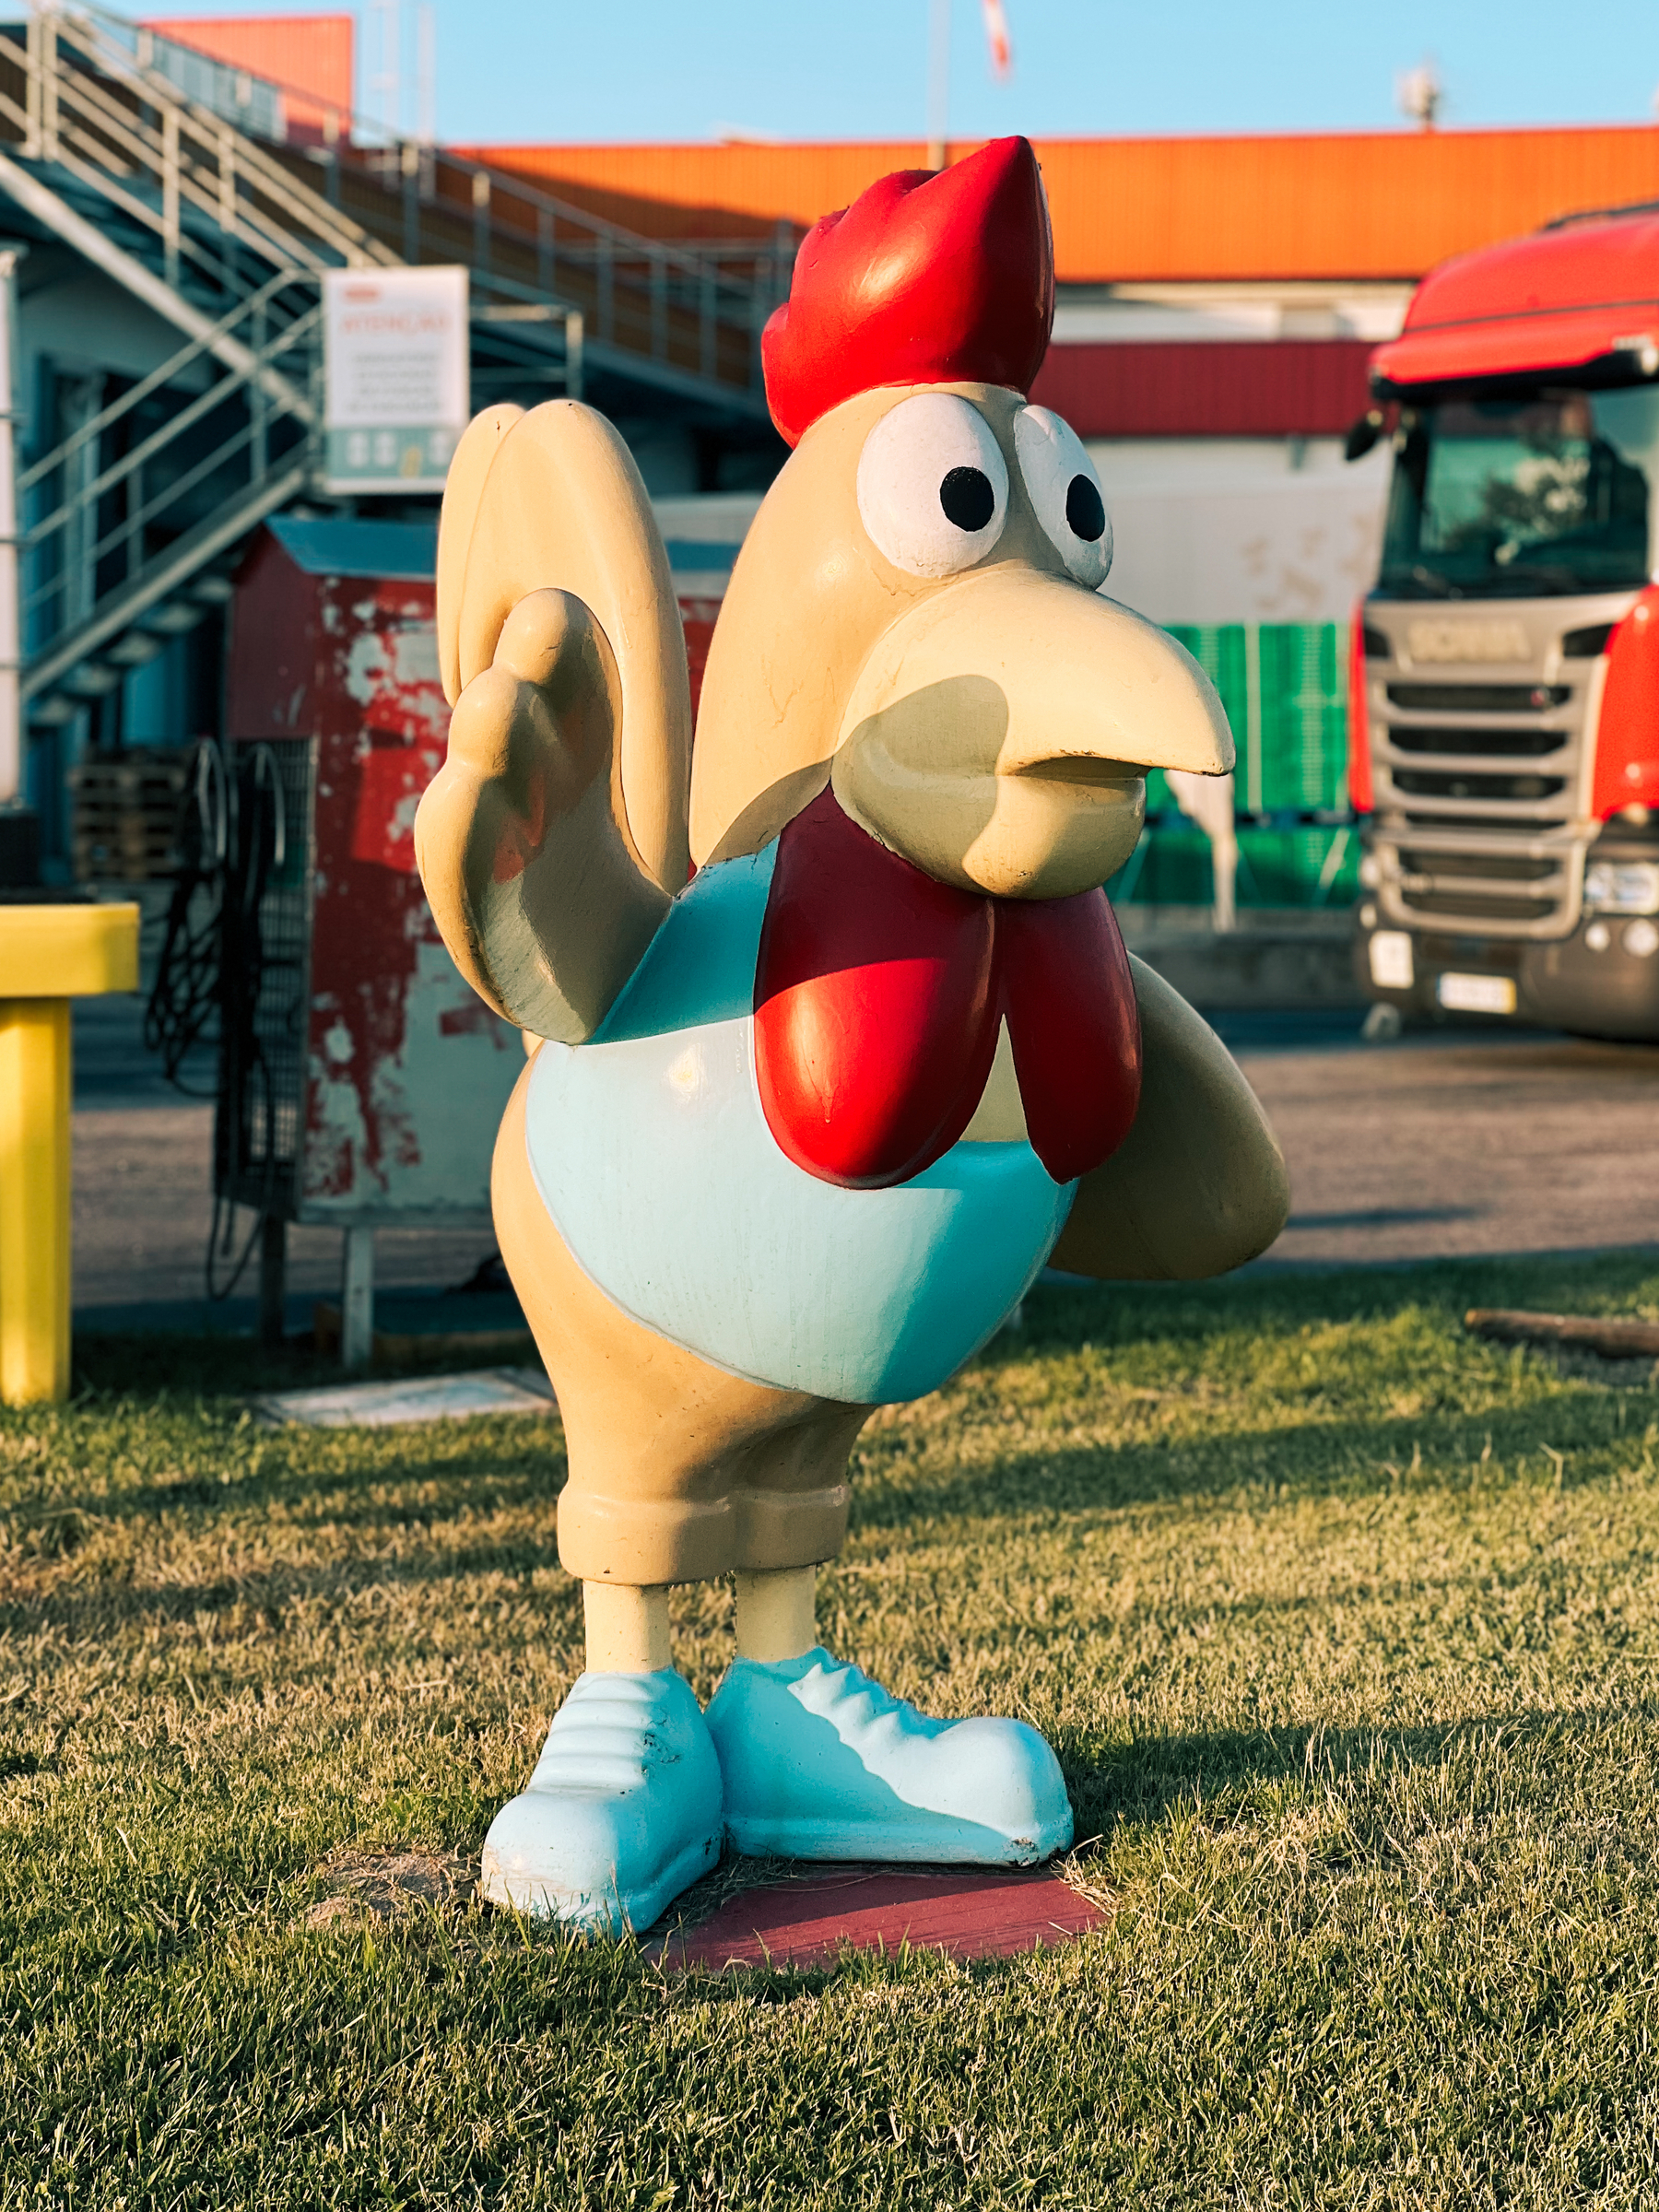 A big chicken sculpture, outside a meat processing plant. A truck can be seen in the background. 